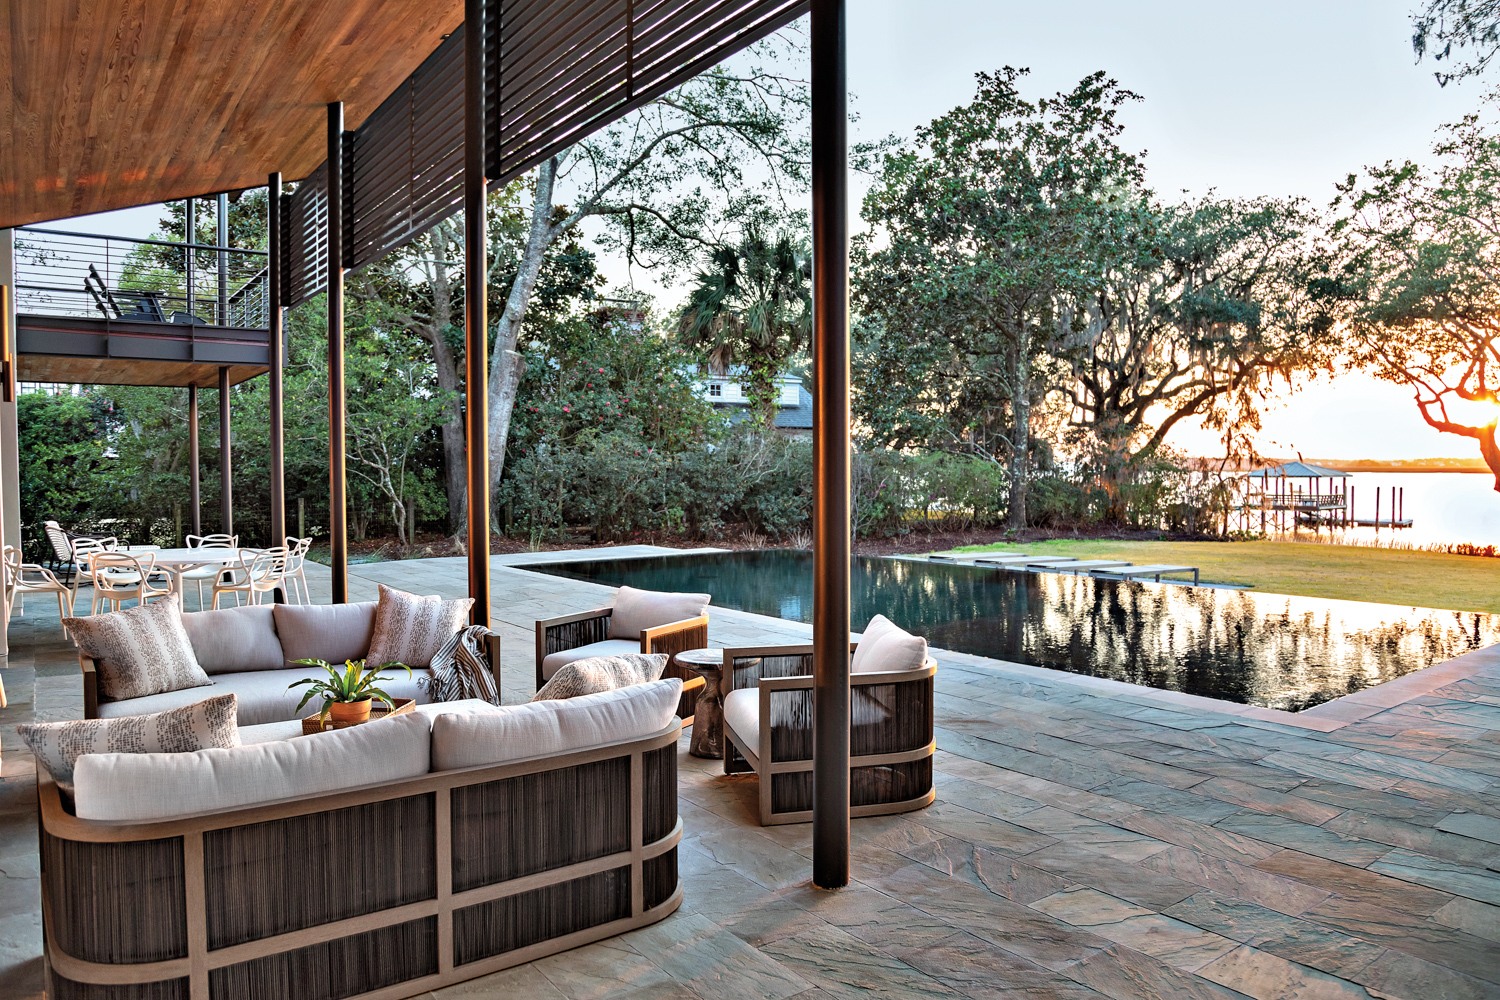 A patio featuring modern furnishings, an infinity pool, live oak trees and river views